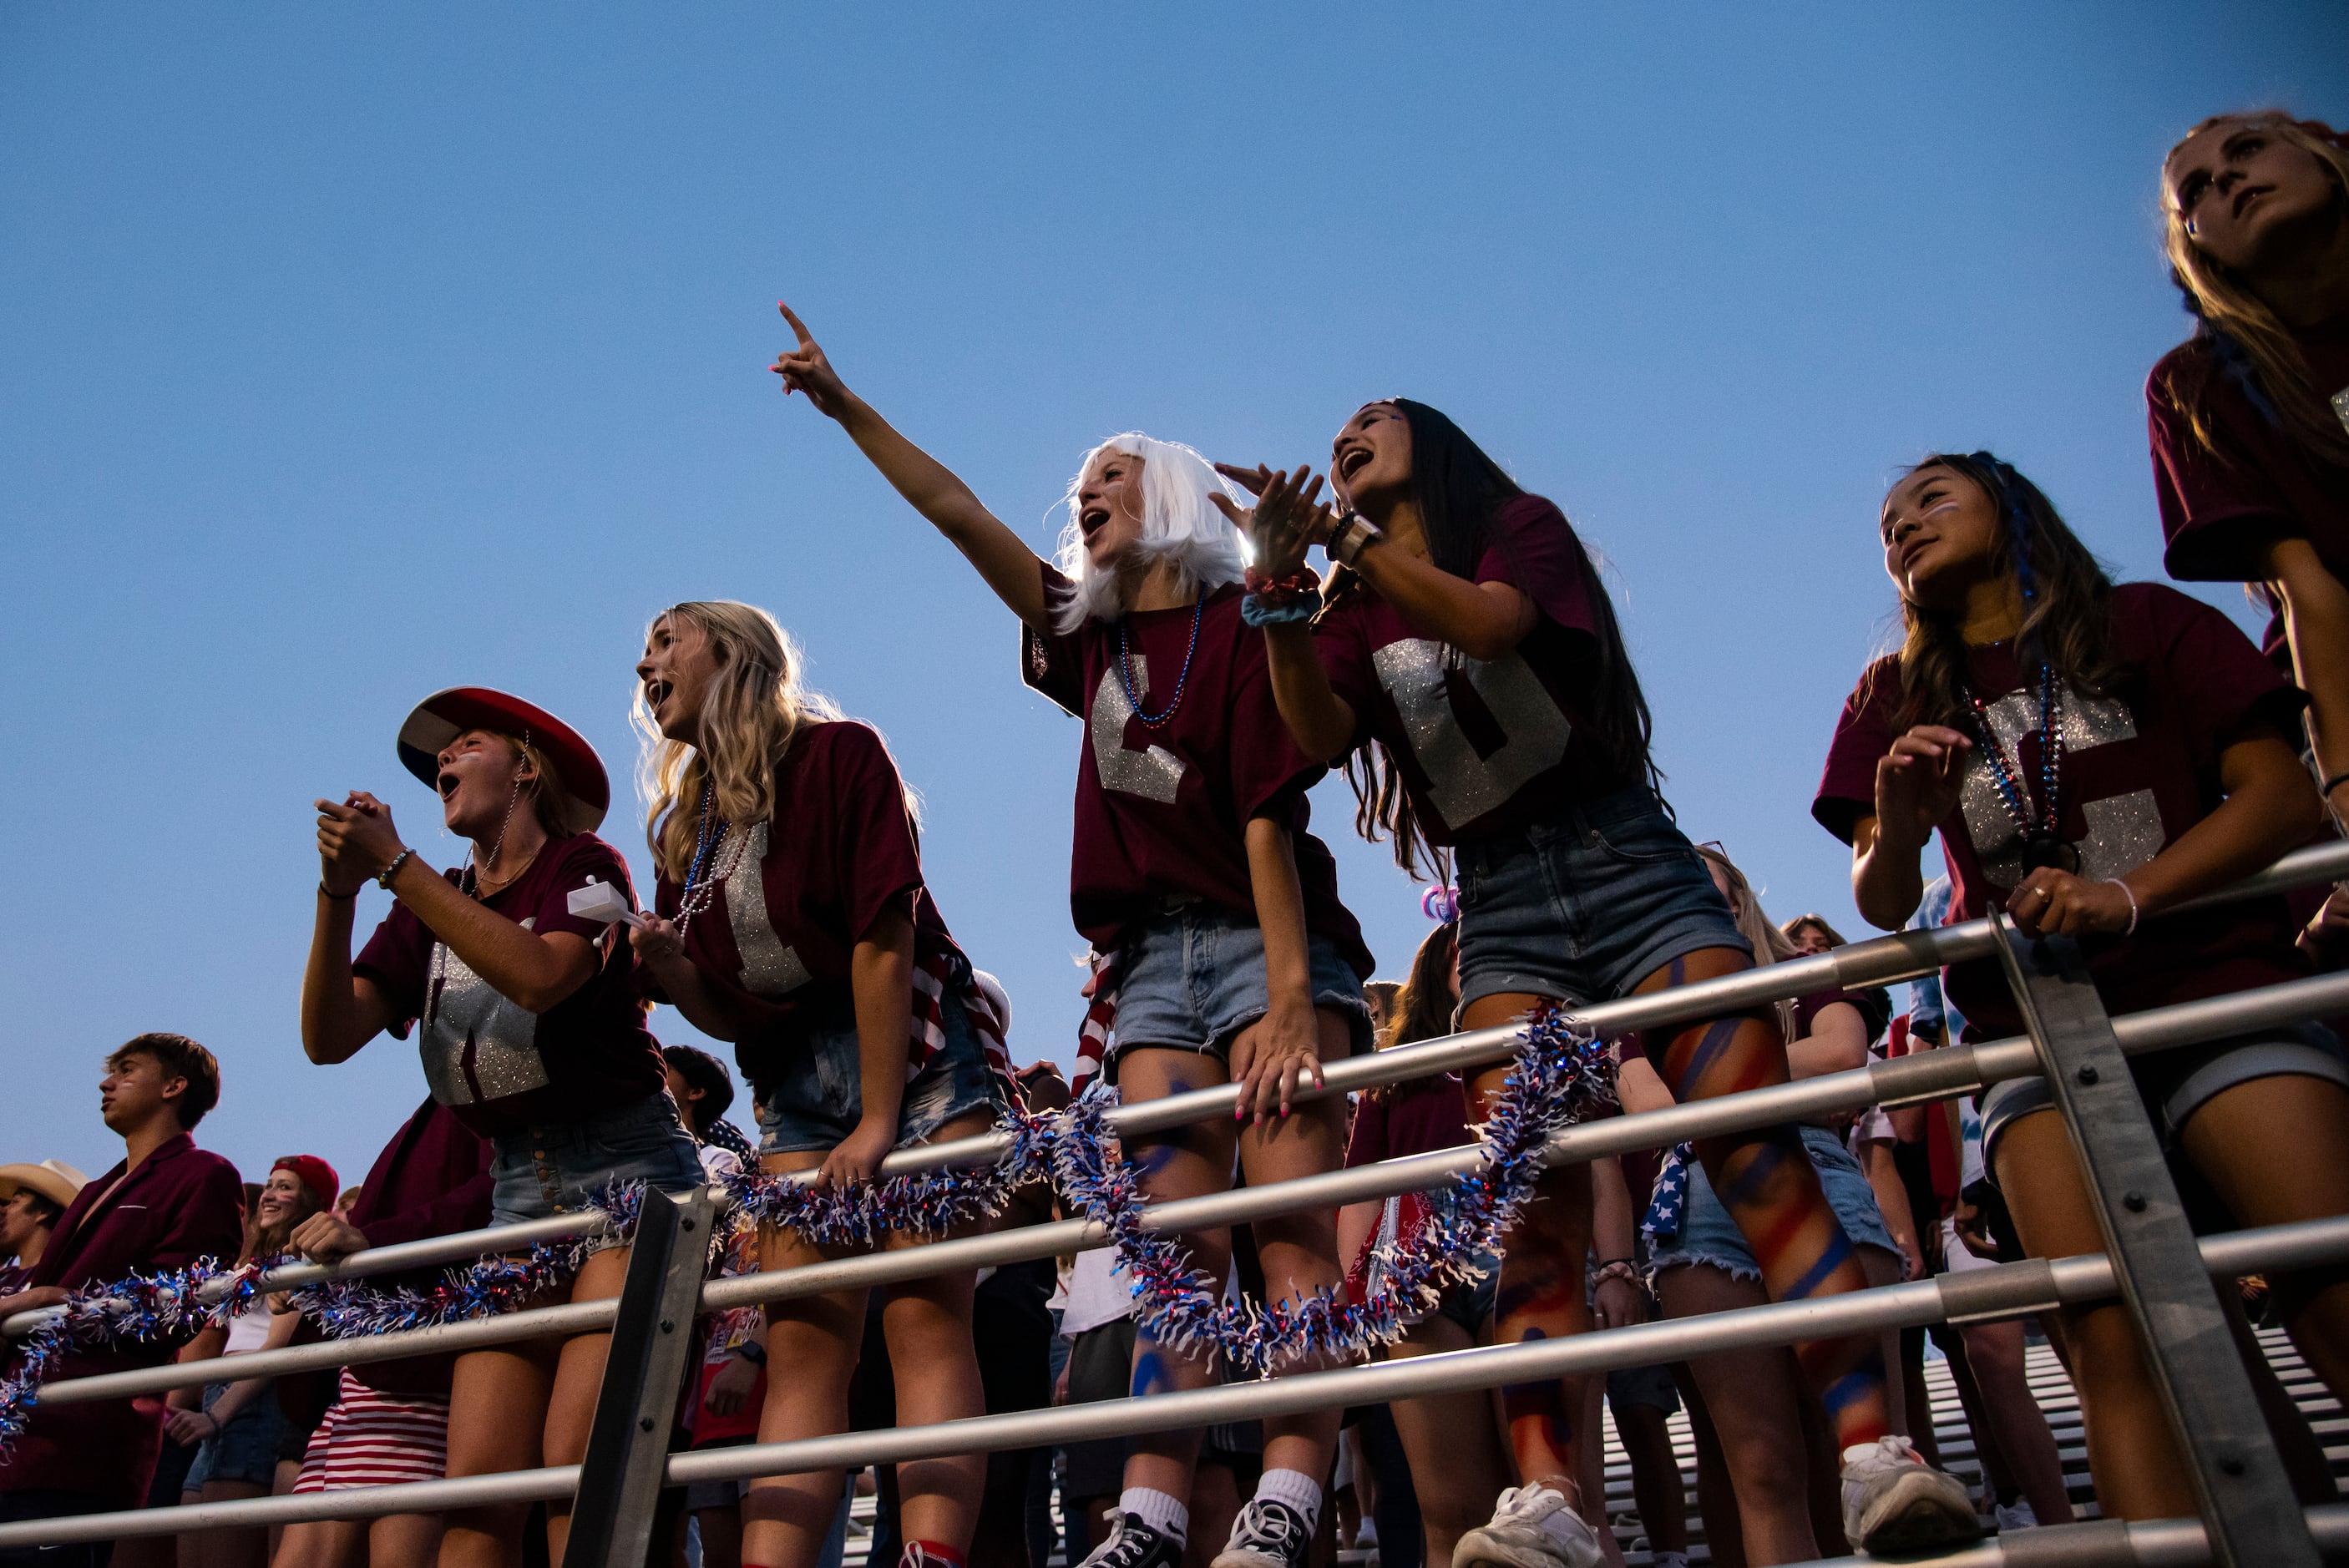 The Plano Senior High School student section gets fired up during a play at Lake HighlandÕs...